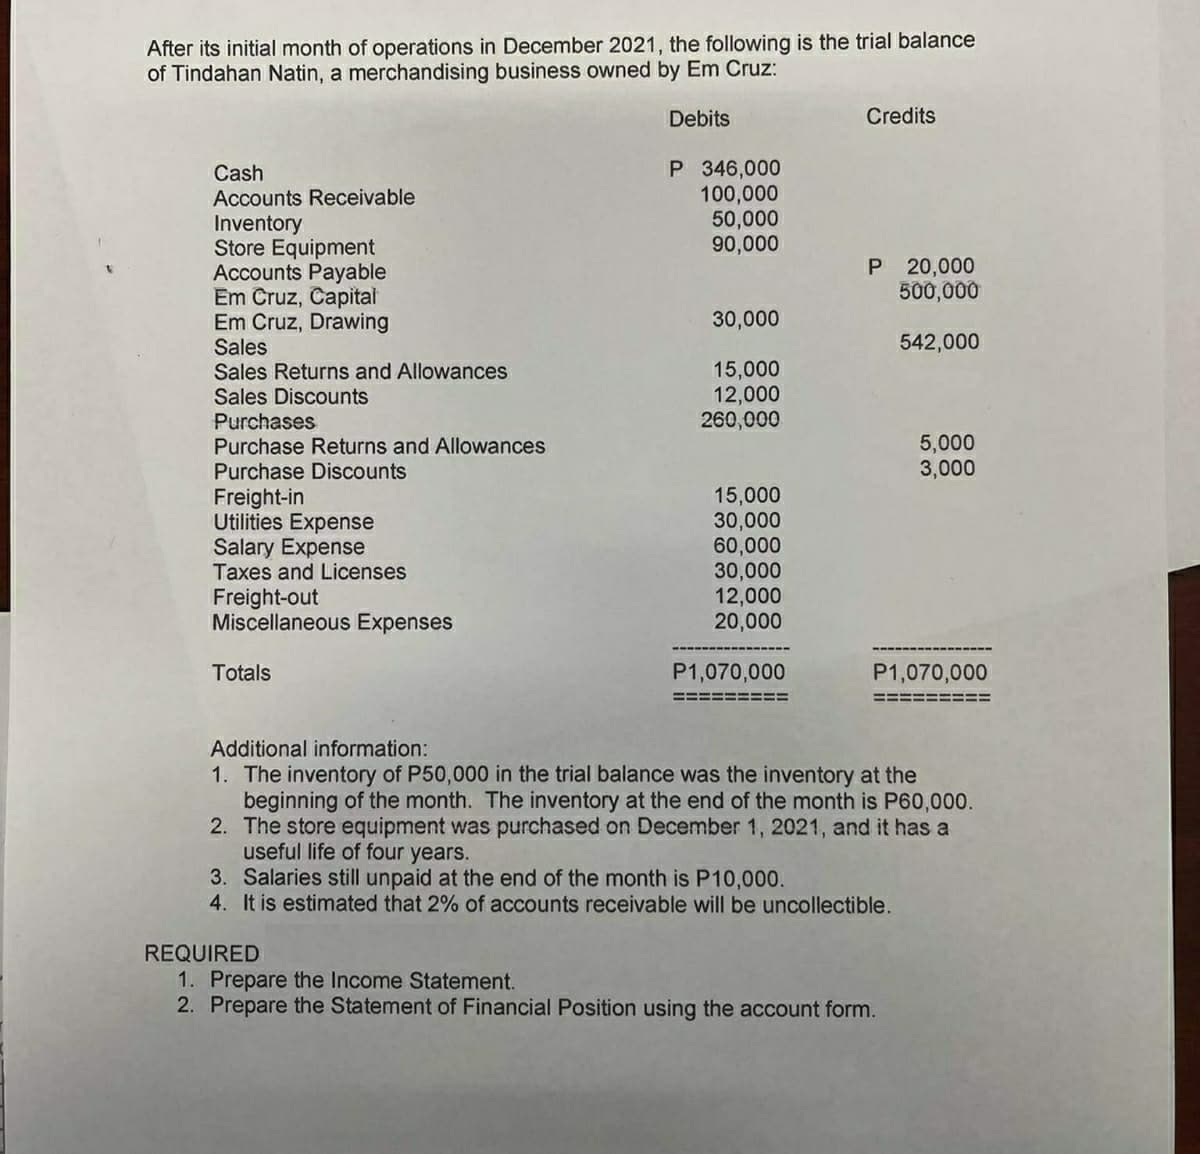 After its initial month of operations in December 2021, the following is the trial balance
of Tindahan Natin, a merchandising business owned by Em Cruz:
Debits
Credits
P 346,000
100,000
50,000
90,000
Cash
Accounts Receivable
Inventory
Store Equipment
Accounts Payable
Em Cruz, Capital
Em Cruz, Drawing
Sales
Sales Returns and Allowances
Sales Discounts
Purchases
Purchase Returns and Allowances
Purchase Discounts
P 20,000
500,000
30,000
542,000
15,000
12,000
260,000
5,000
3,000
Freight-in
Utilities Expense
Salary Expense
Taxes and Licenses
Freight-out
Miscellaneous Expenses
15,000
30,000
60,000
30,000
12,000
20,000
Totals
P1,070,000
P1,070,000
Additional information:
1. The inventory of P50,000 in the trial balance was the inventory at the
beginning of the month. The inventory at the end of the month is P60,000.
2. The store equipment was purchased on December 1, 2021, and it has a
useful life of four years.
3. Salaries still unpaid at the end of the month is P10,000.
4. It is estimated that 2% of accounts receivable will be uncollectible.
REQUIRED
1. Prepare the Income Statement.
2. Prepare the Statement of Financial Position using the account form.
